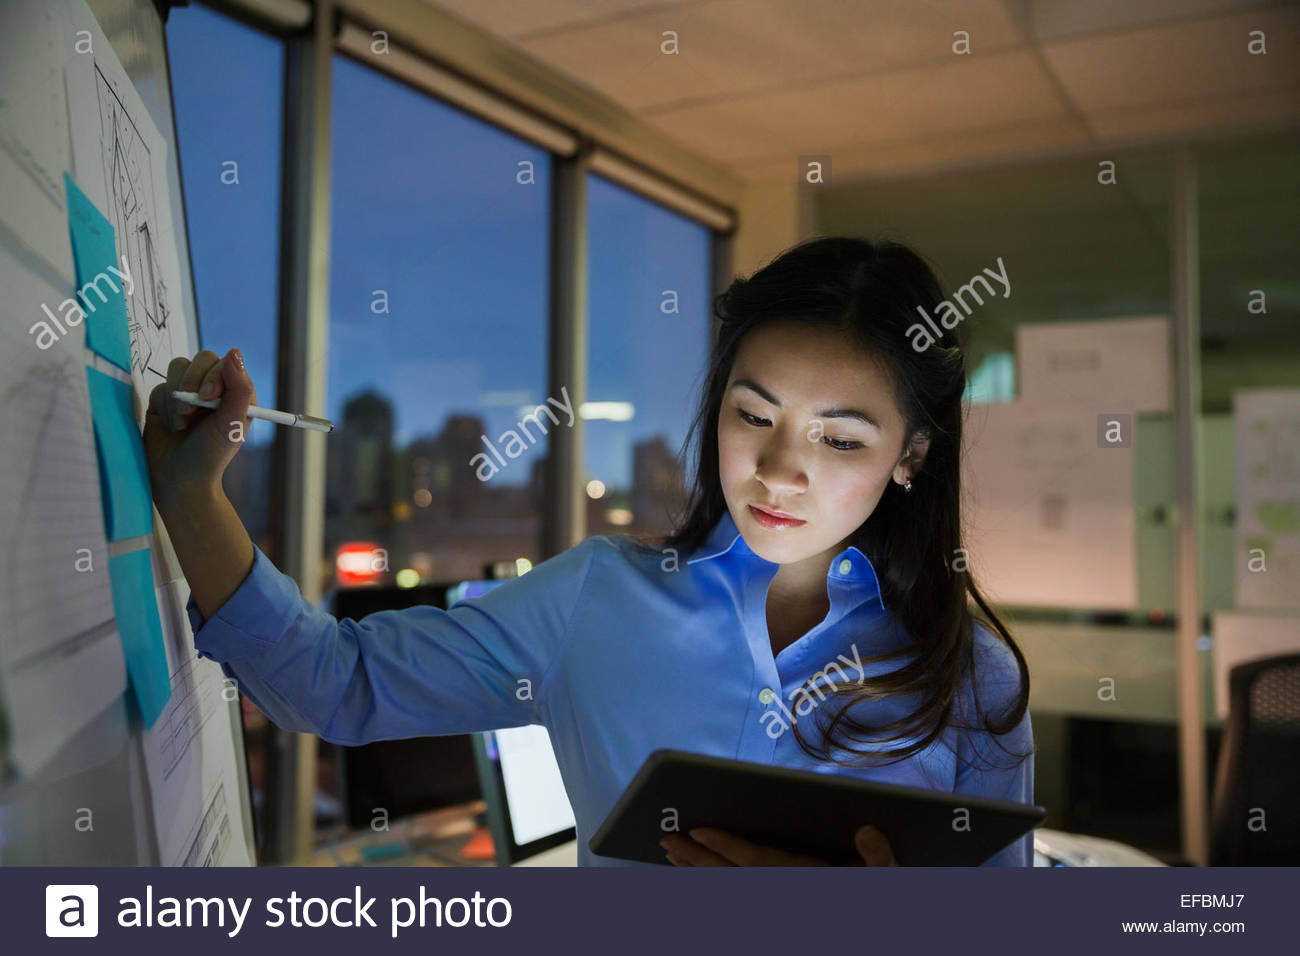 Businesswoman at whiteboard working late in conference room Stock Photo